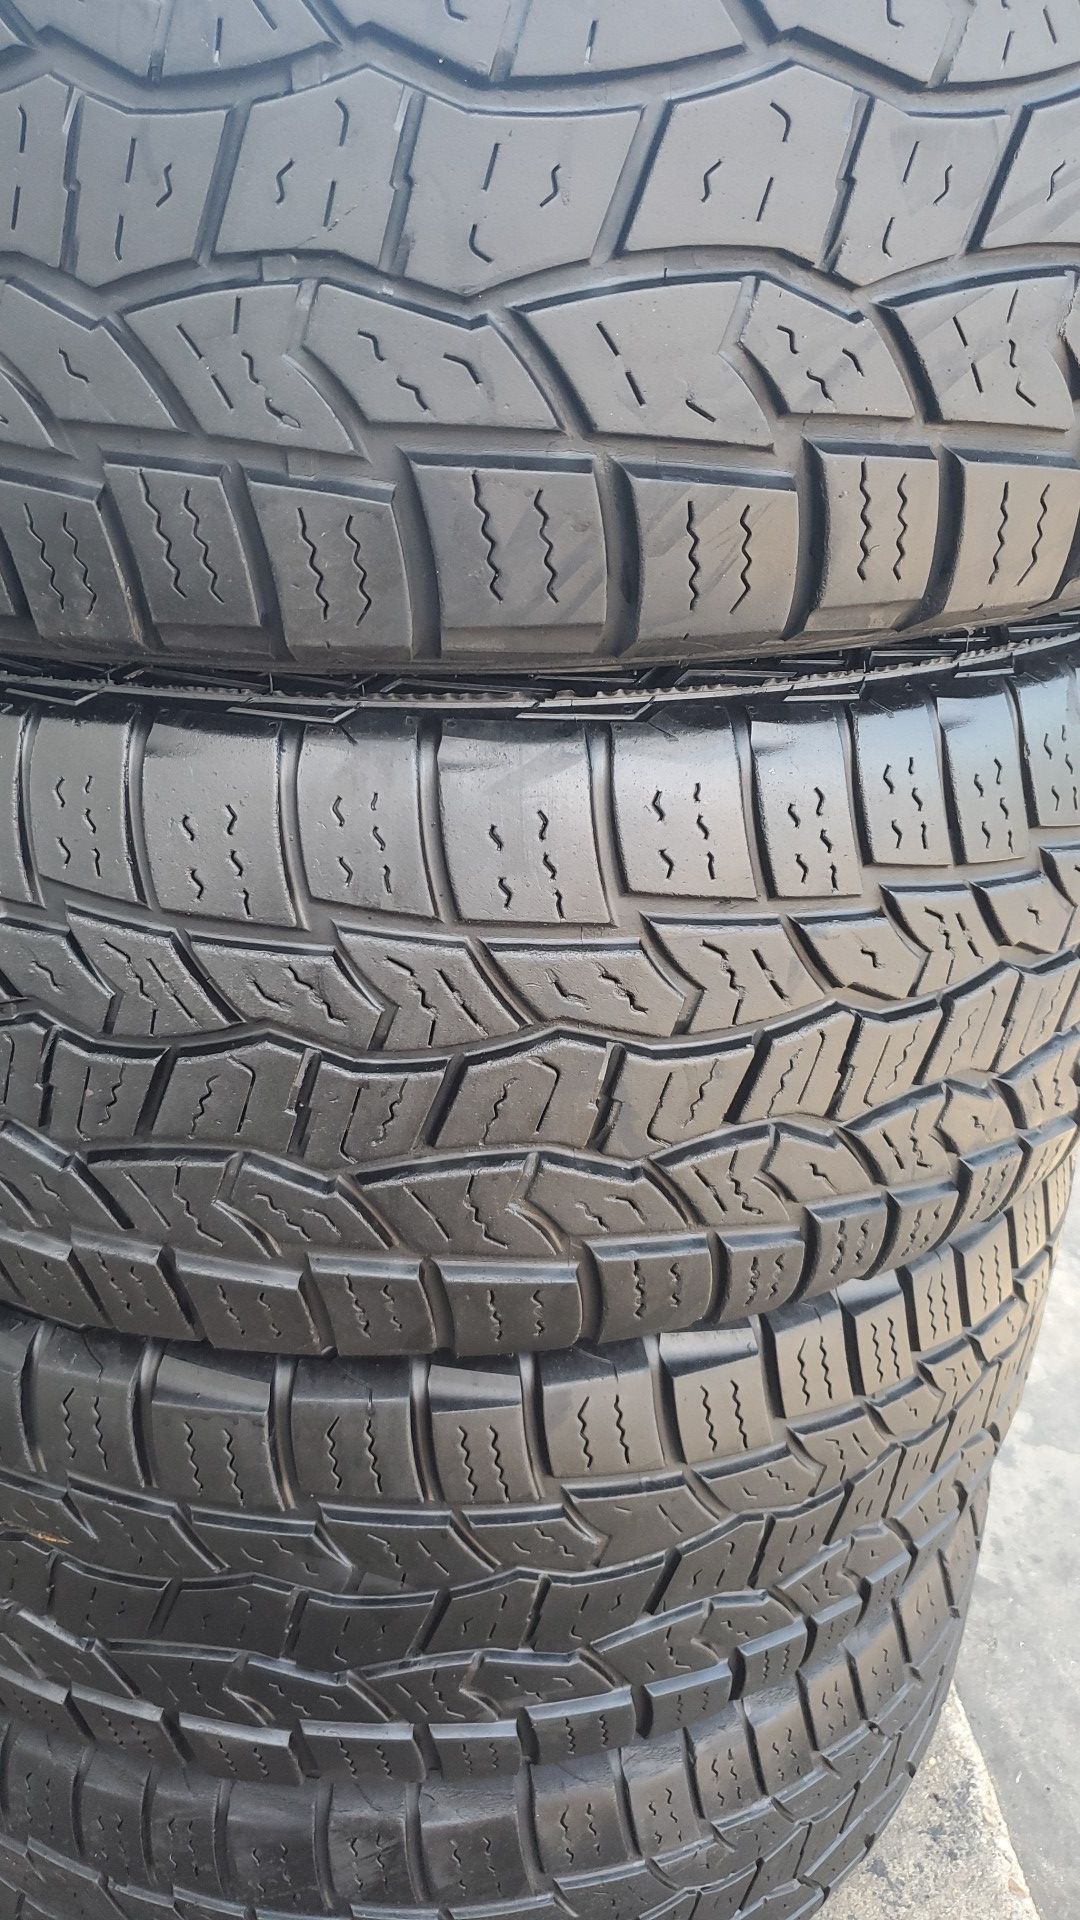 Four very nice COOPER tires for sale. Very strong tires. 265/70/17